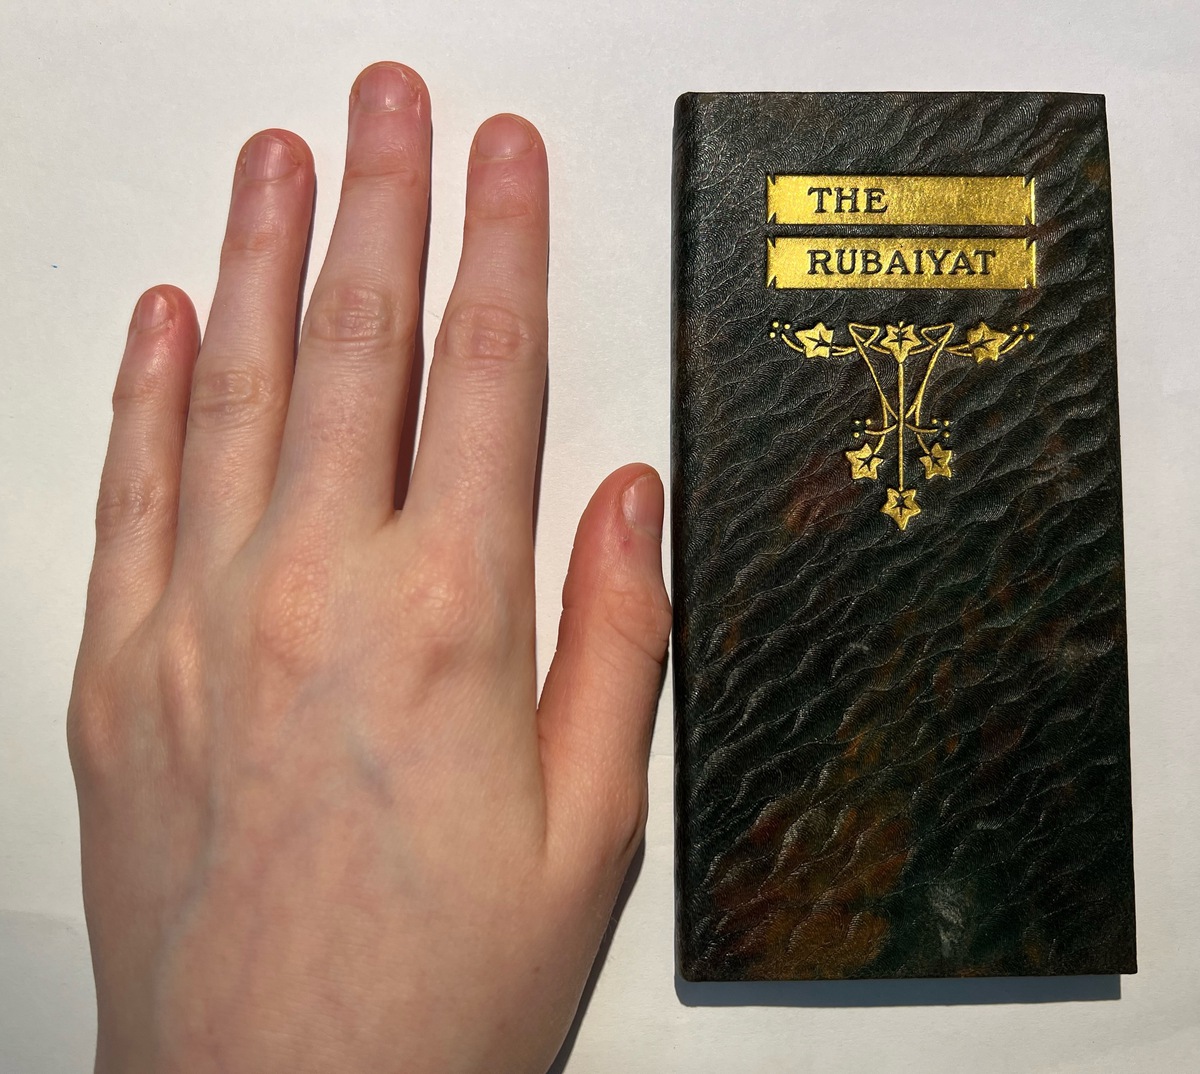 How big the copy is, my hand for comparison